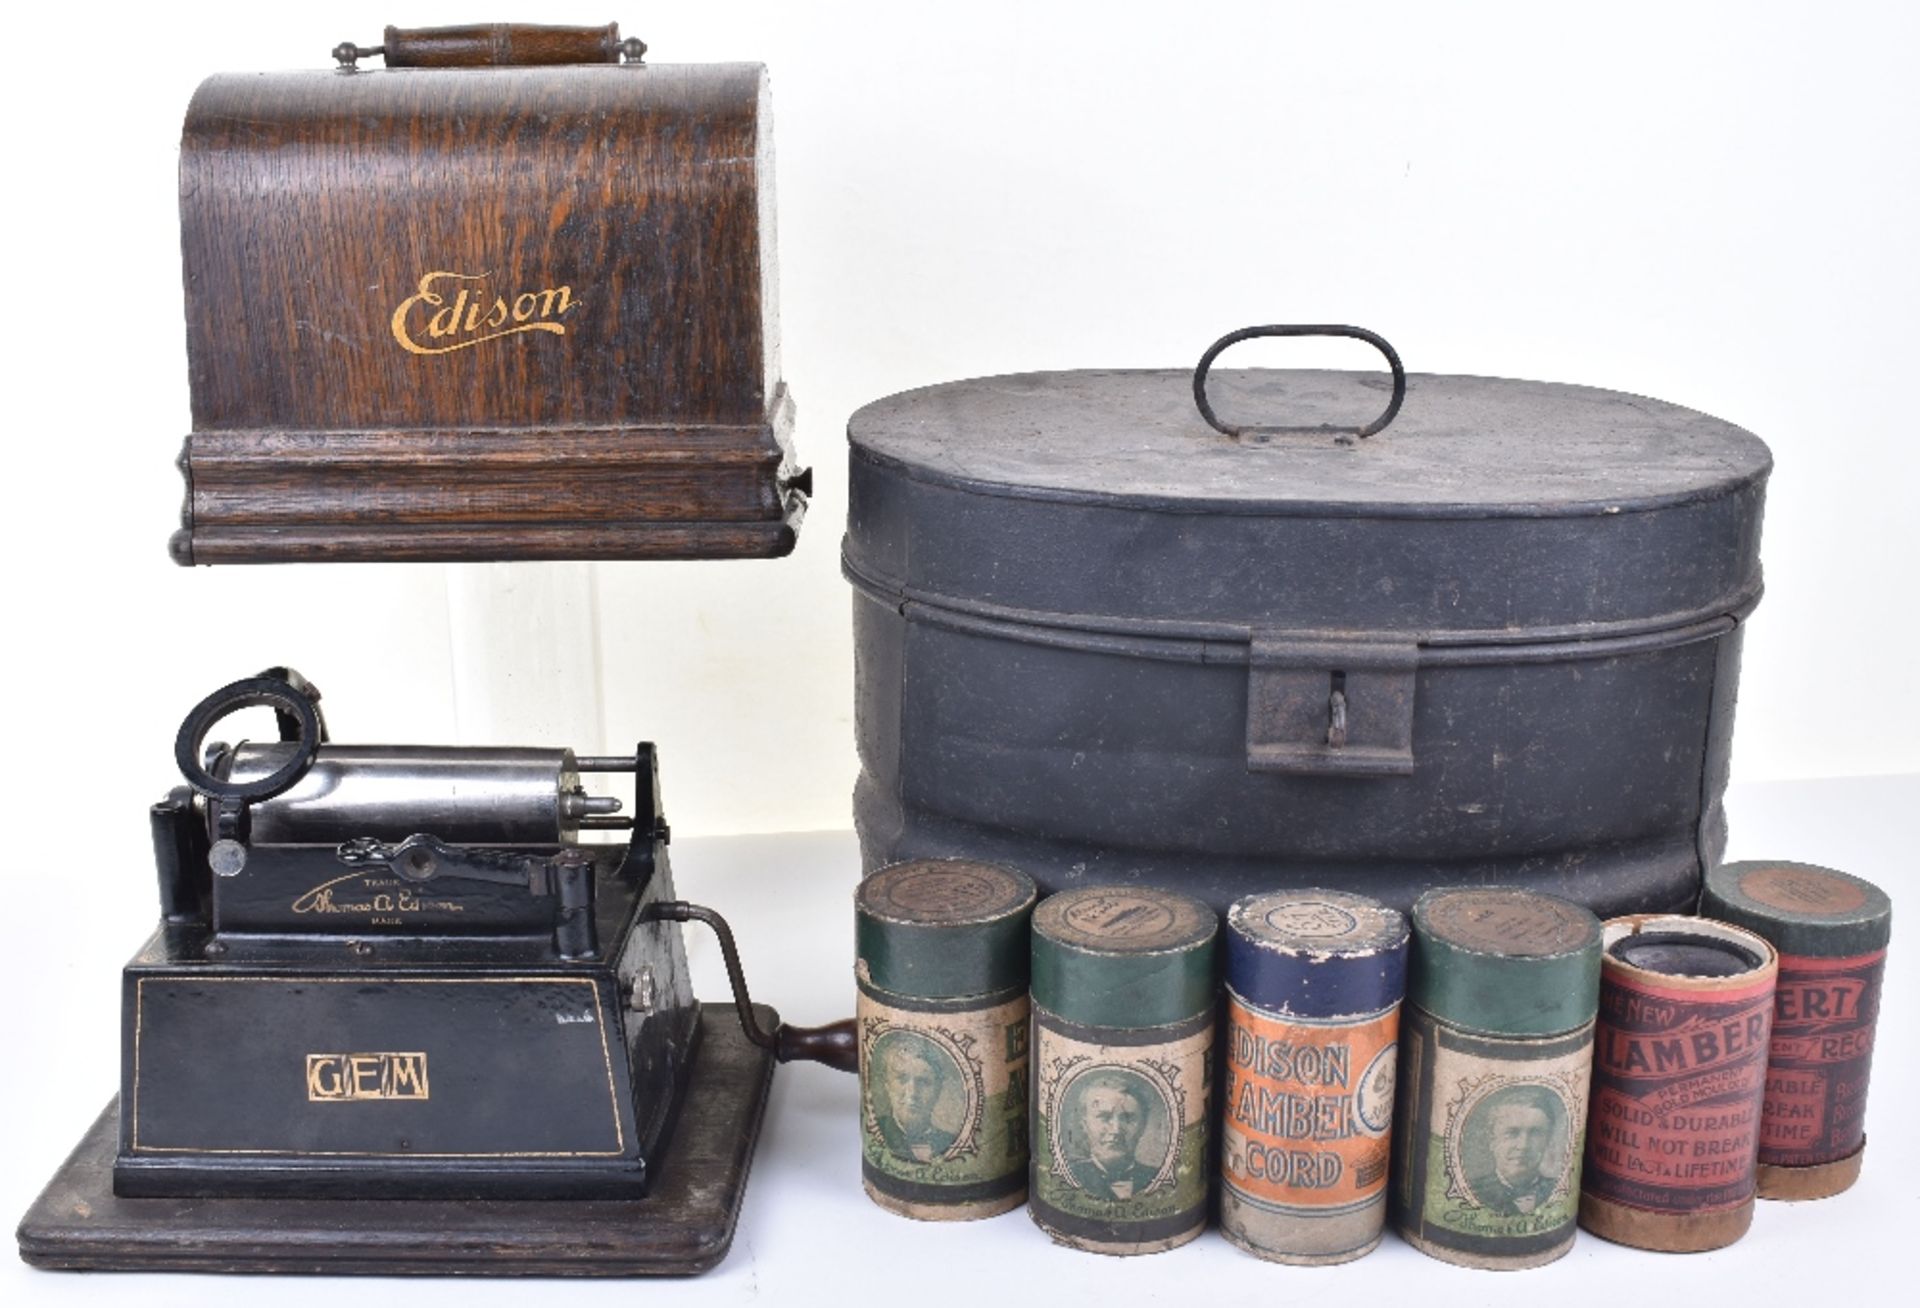 A Thomas Edison Gem phonograph with case